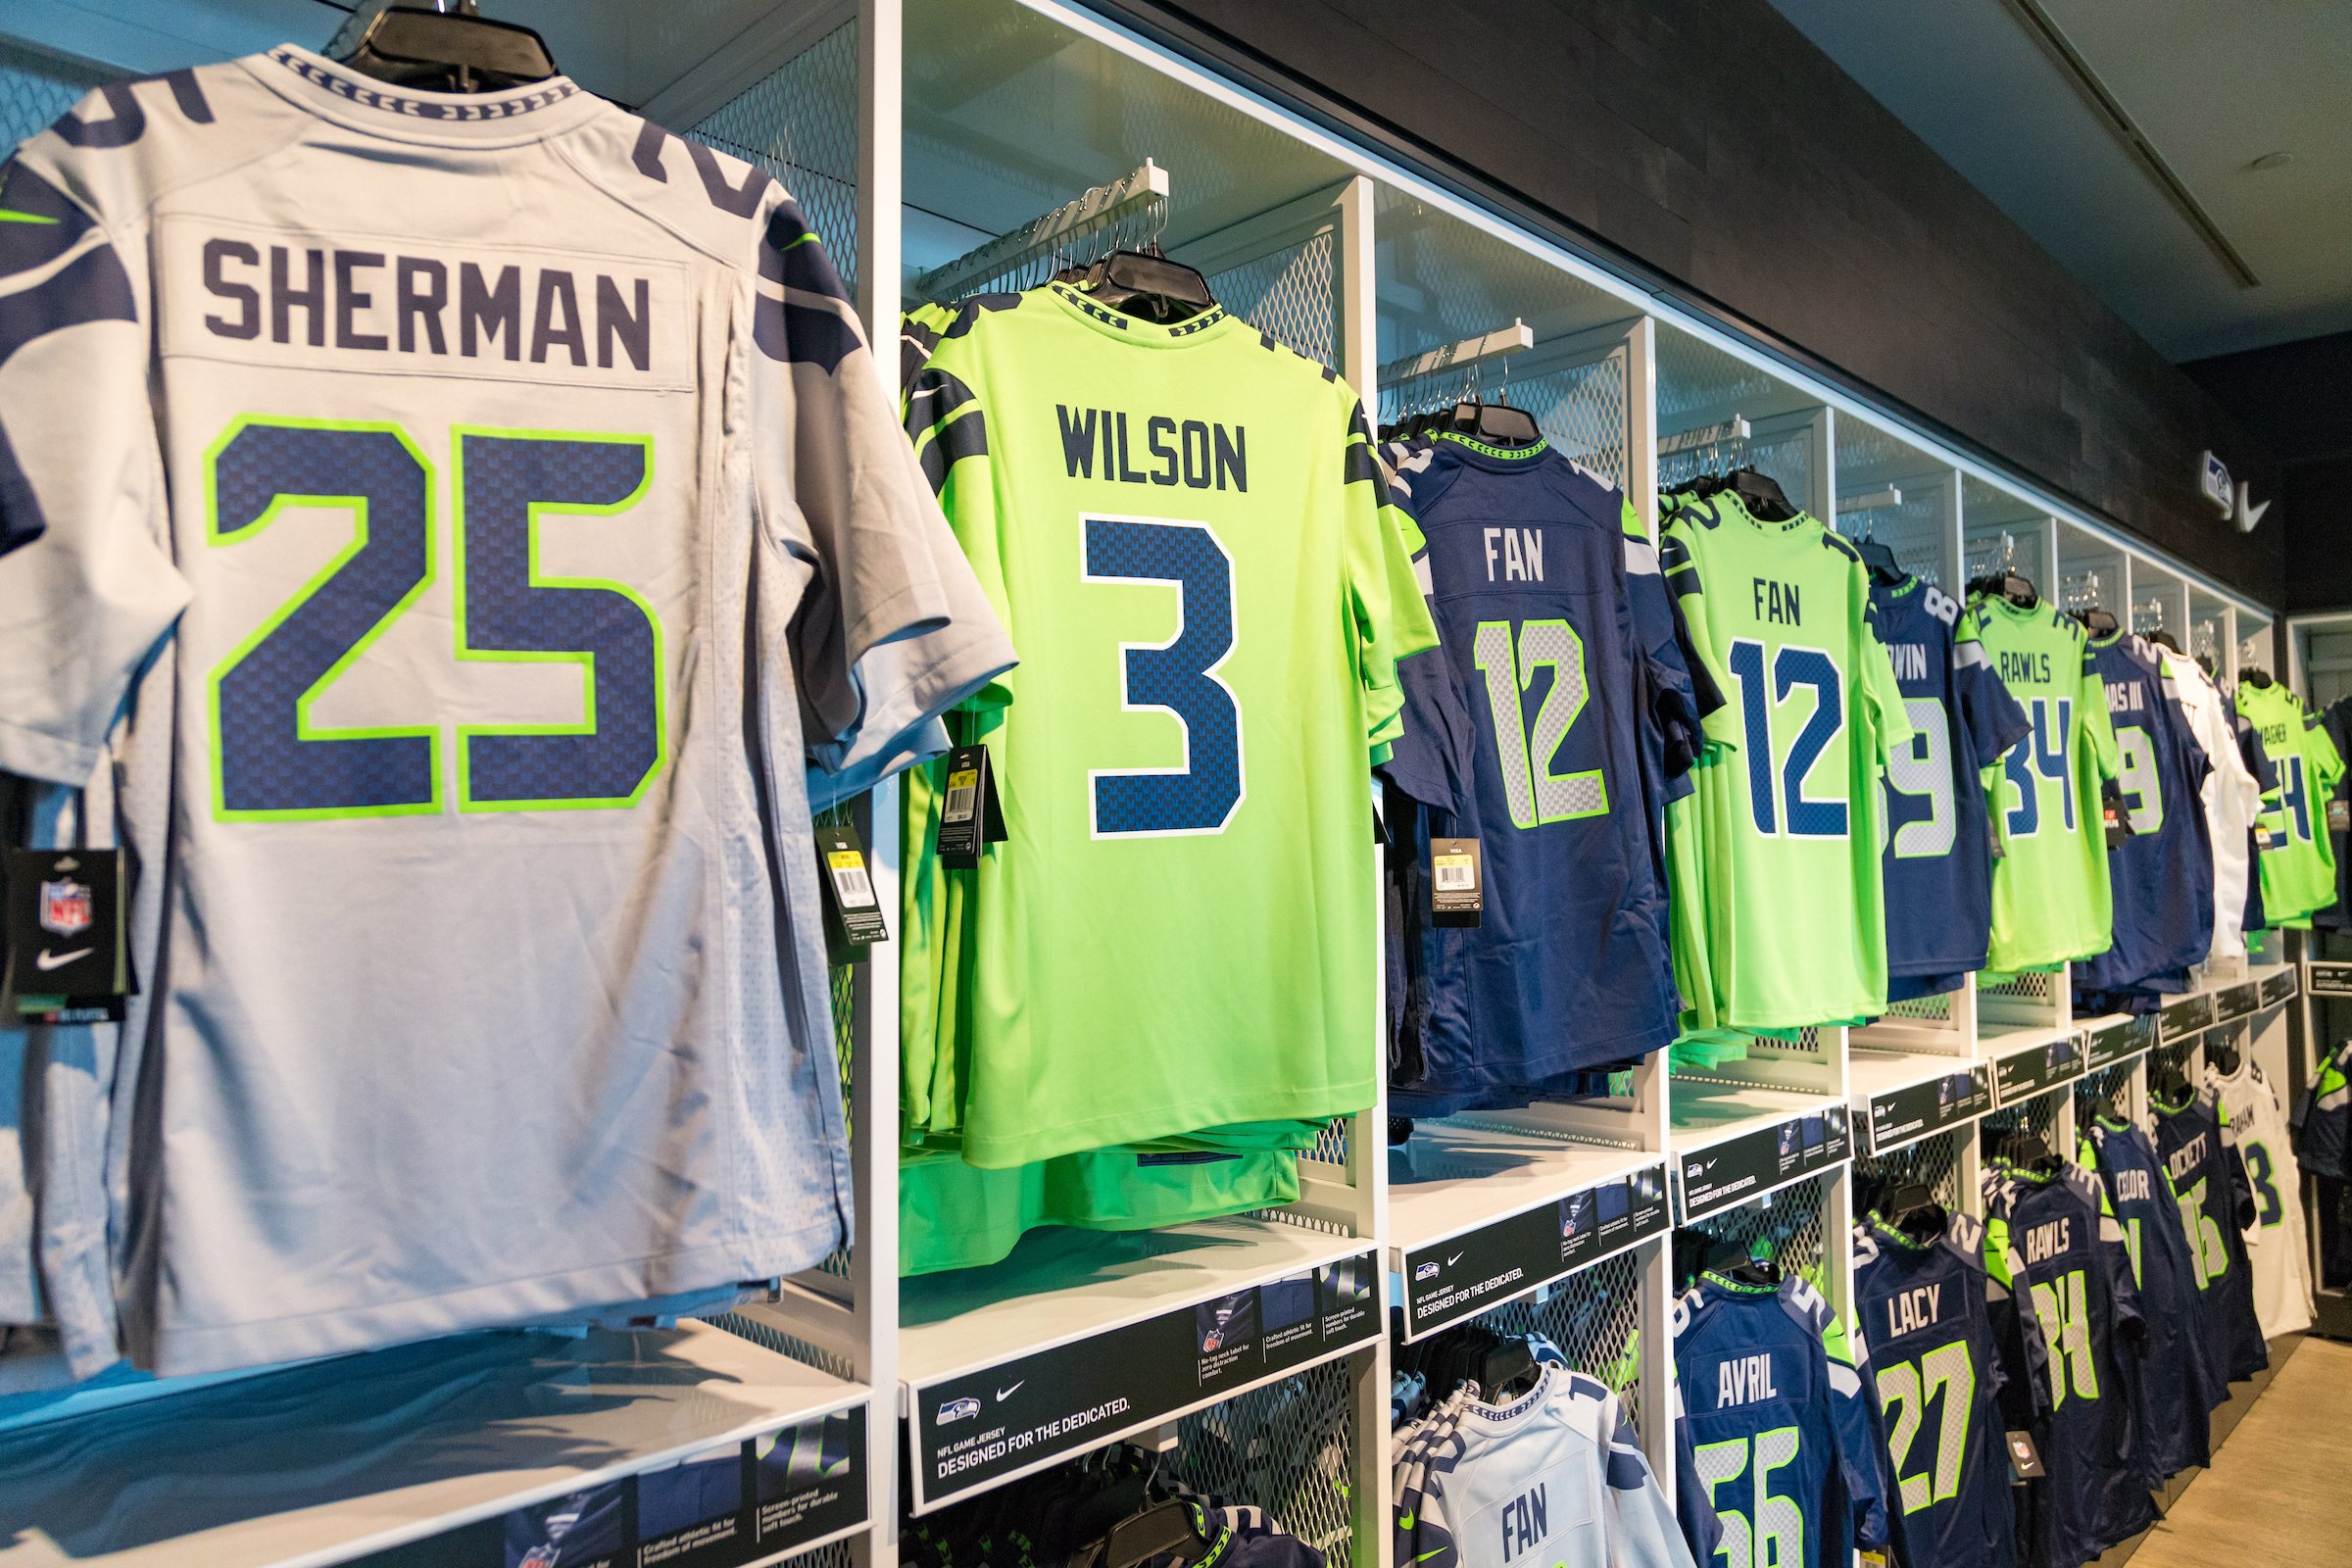 fangst gen Northern Seahawks Pro Shop on Twitter: "The deals just keep rolling for the #12s.  25% OFF any @Seahawks jersey in-store now until Sunday (1/14)! See stores  for details. #ThankYou12s https://t.co/NRxw5yNx9d" / Twitter